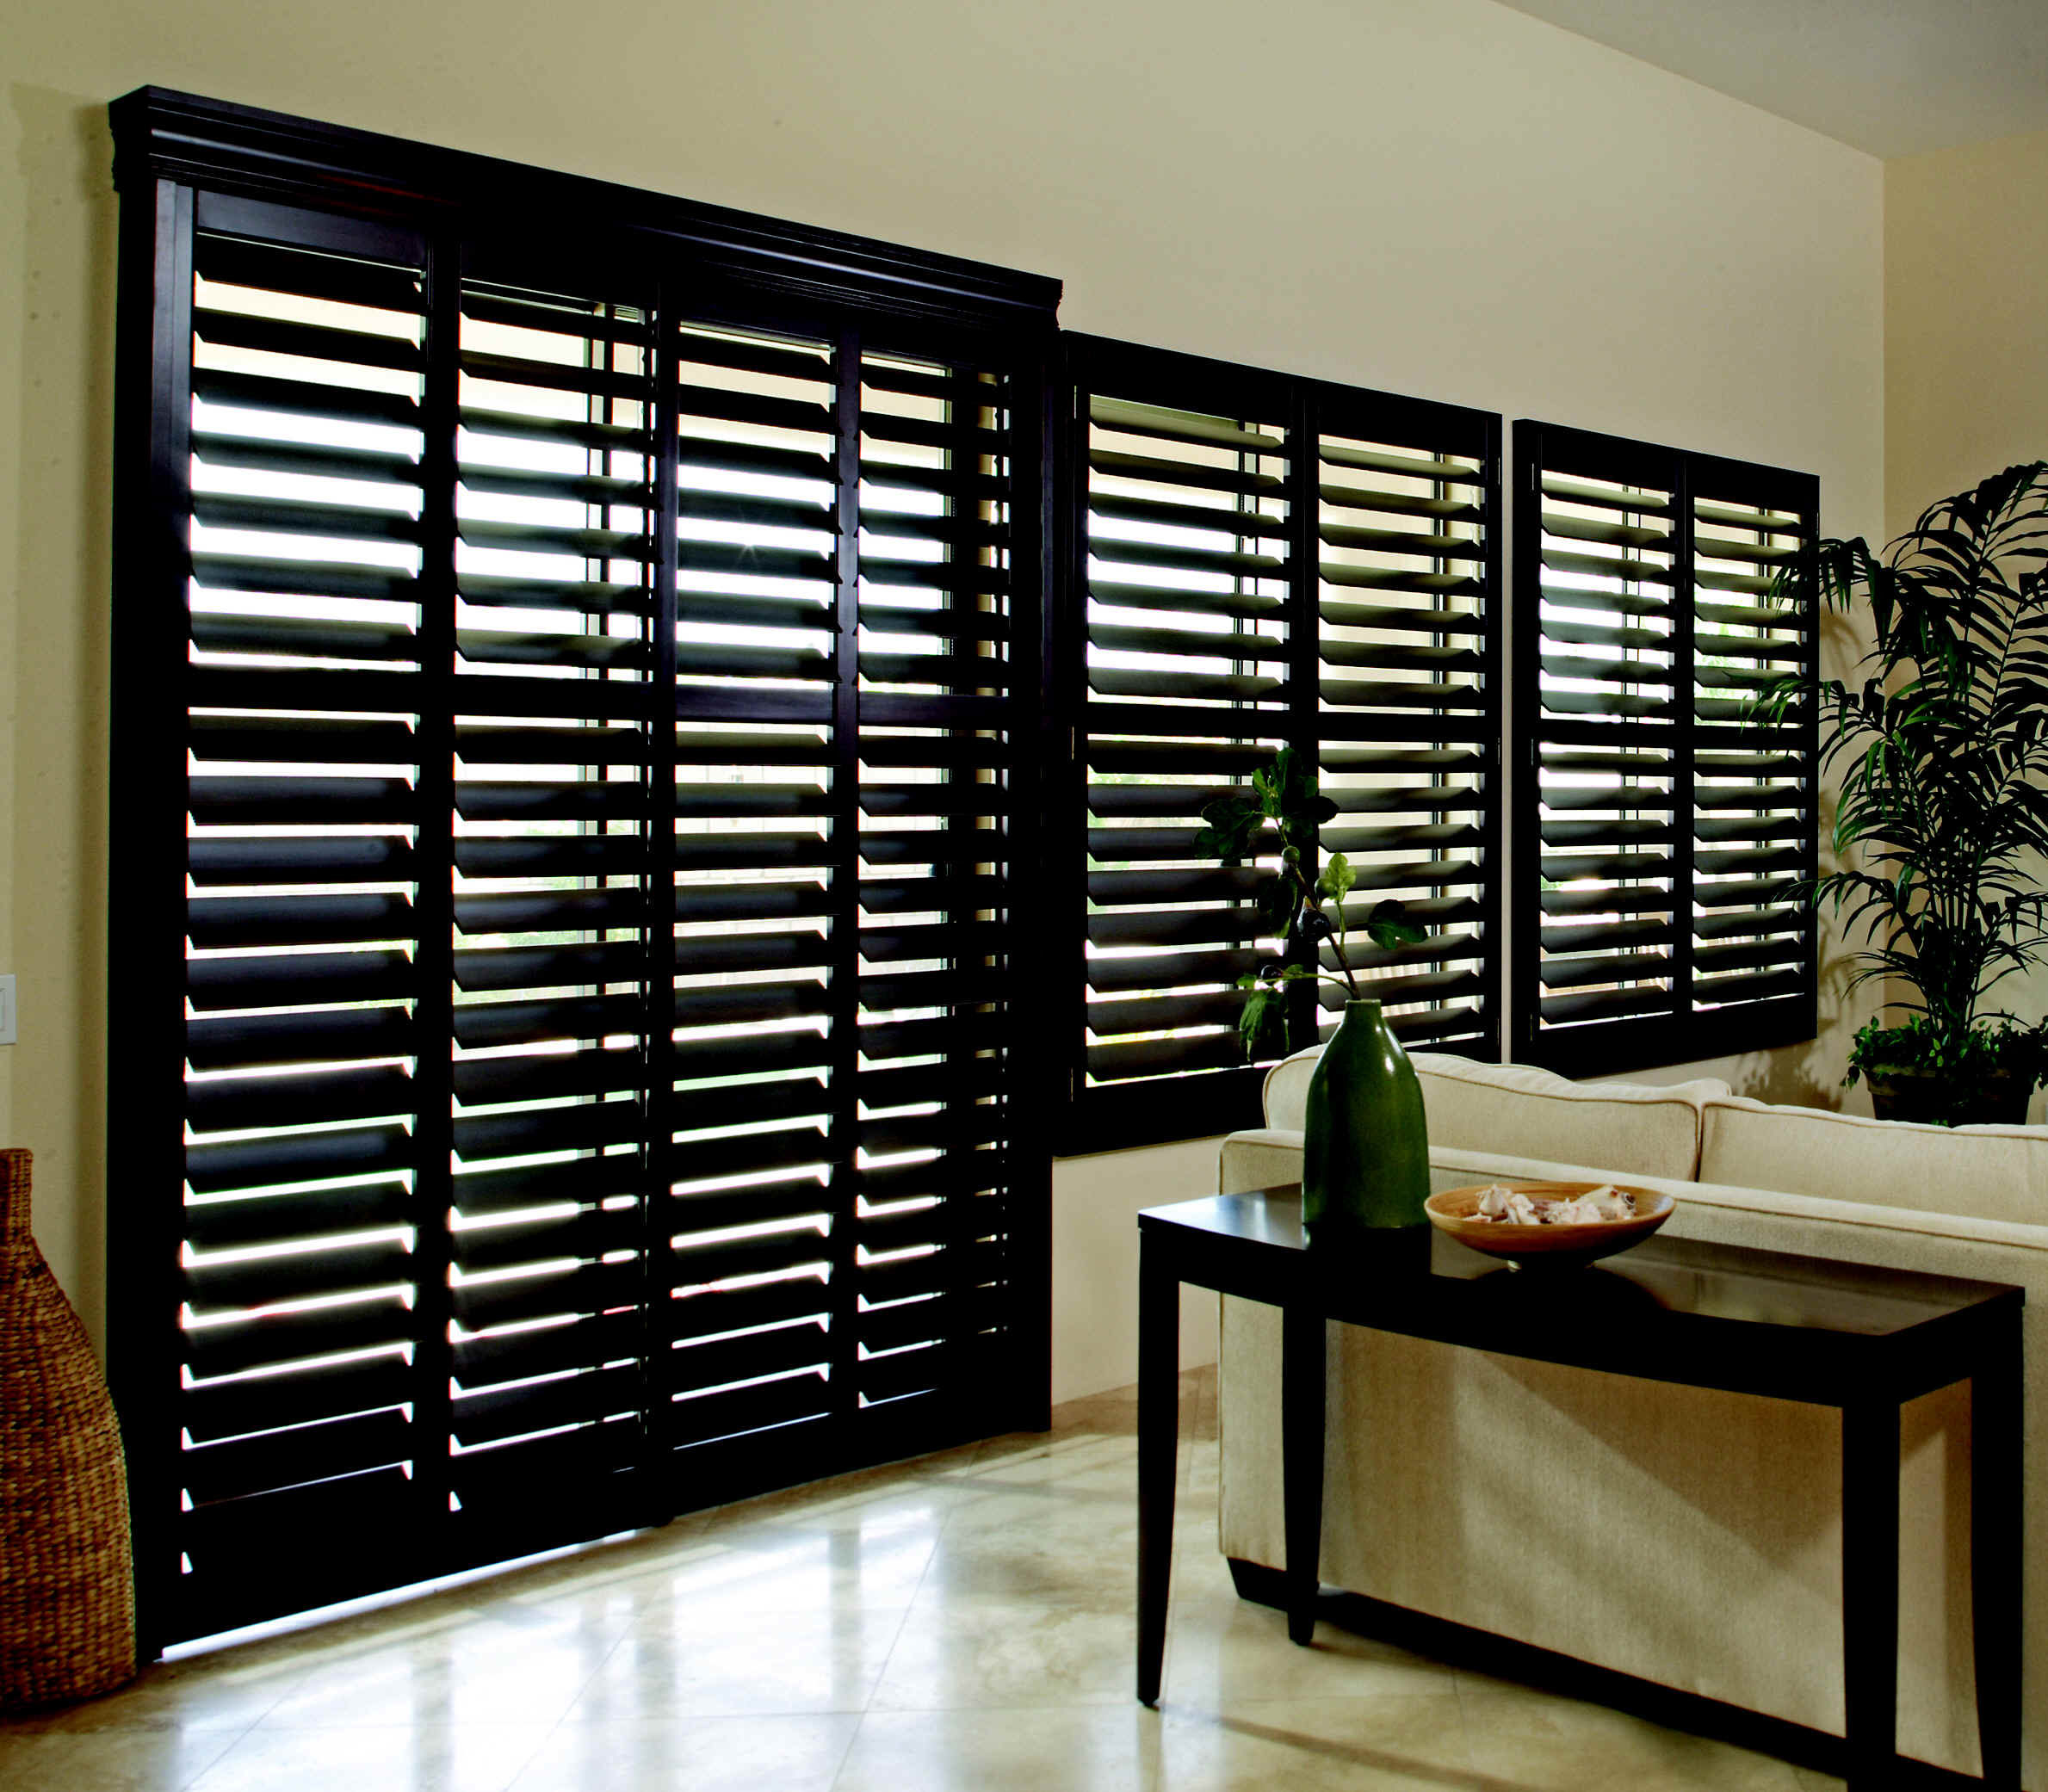 Clearview Shutters For Sale At Low Prices in Clay